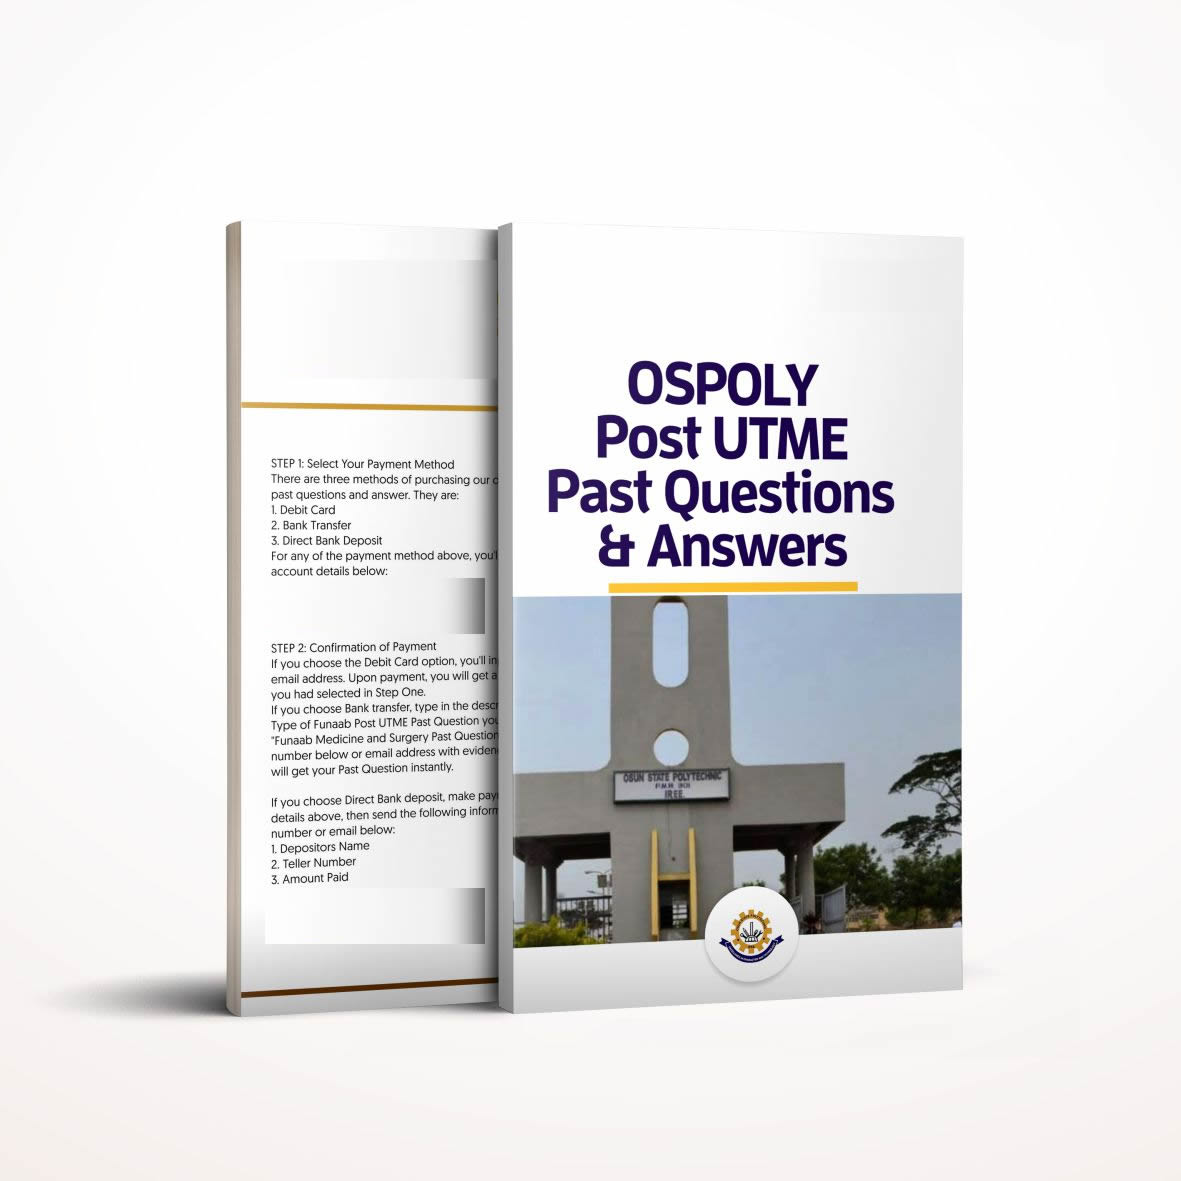 OSPOLY Post UTME past questions and answers